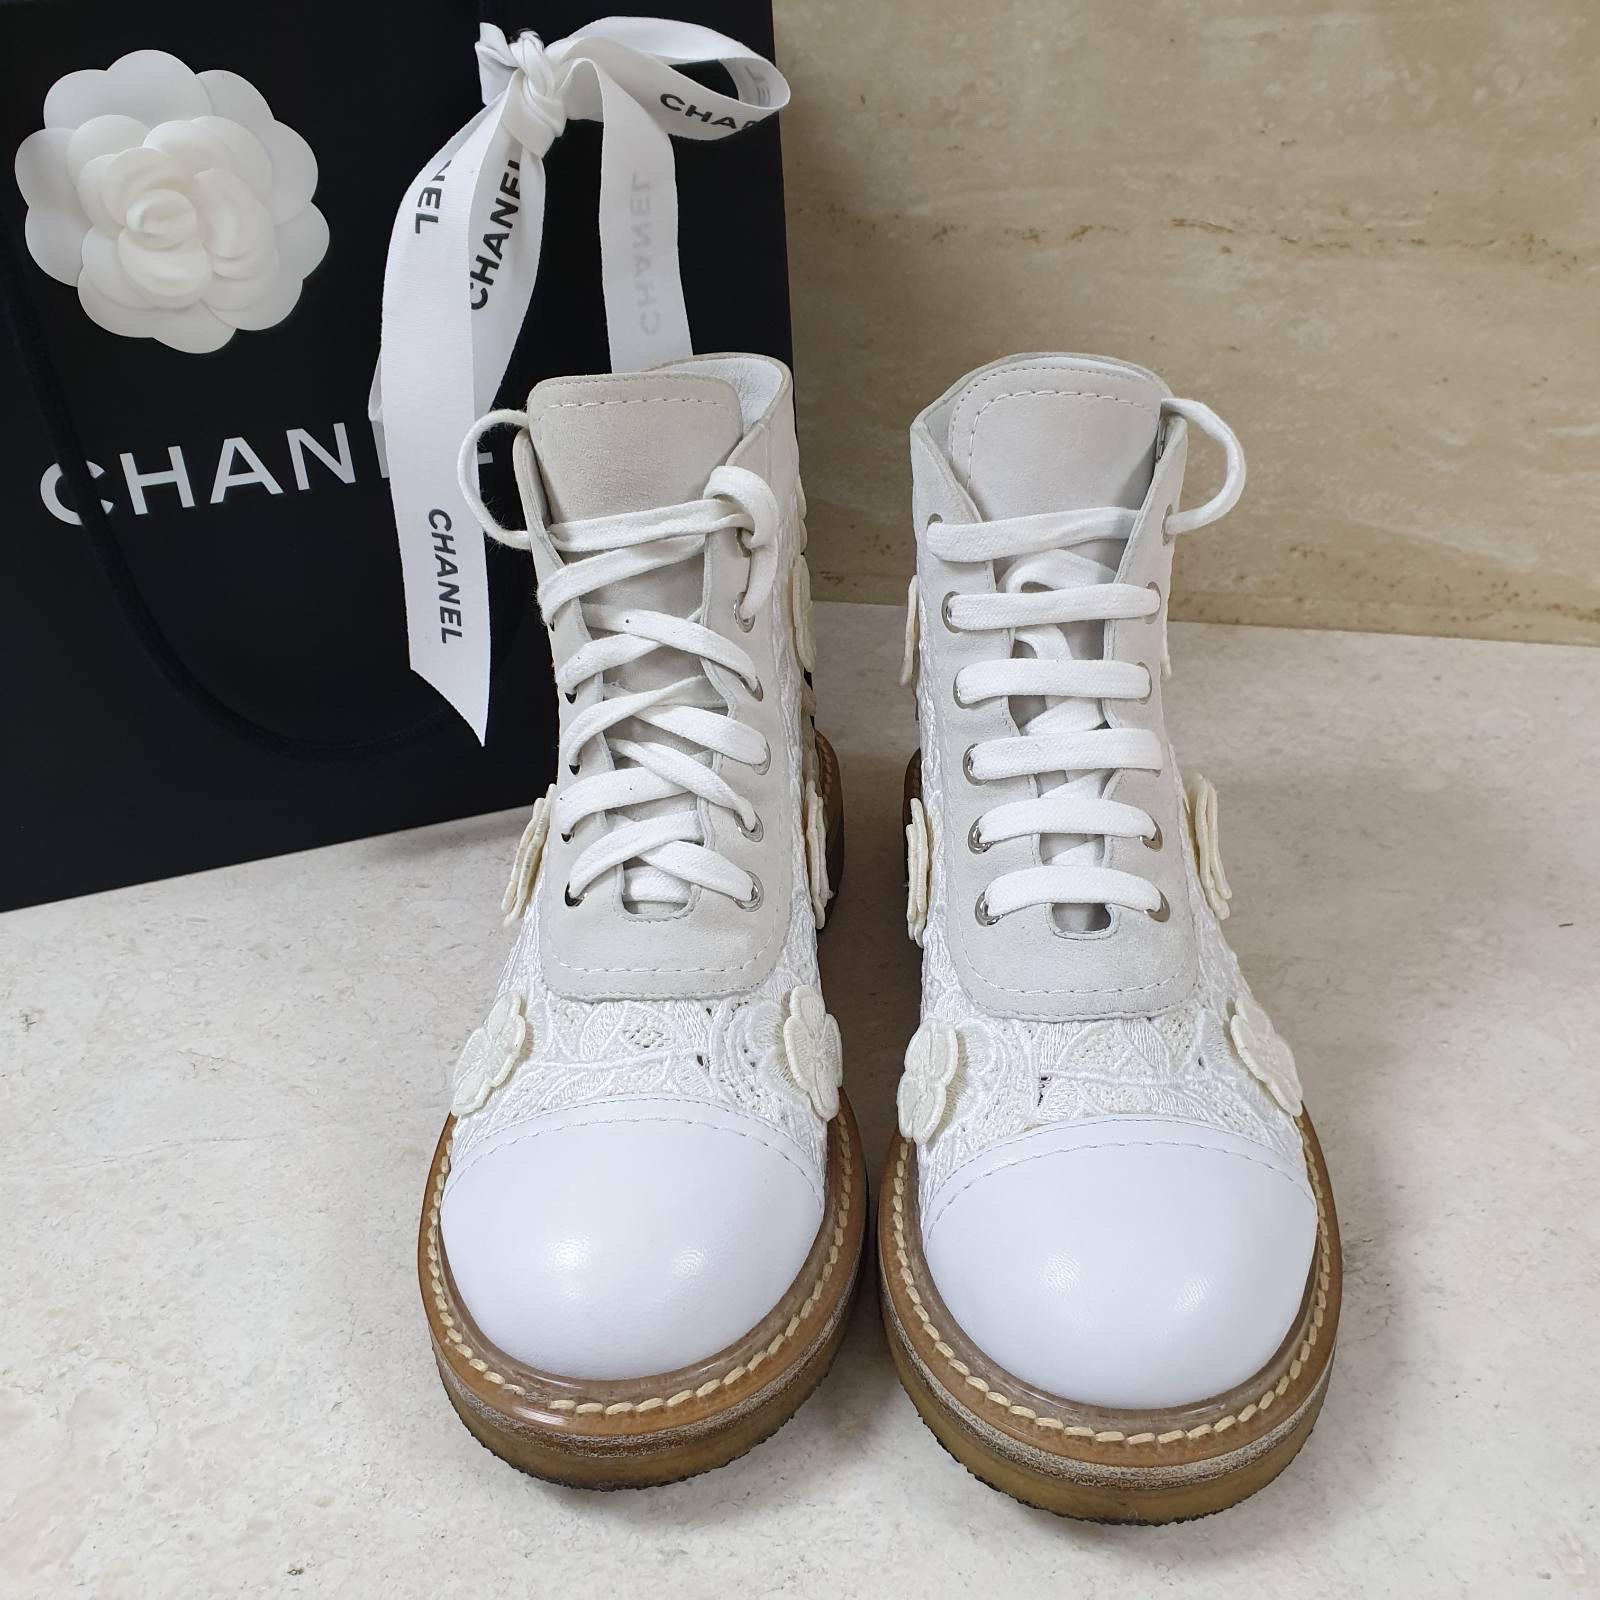 Chanel 19SS Lace-up Camellia Textile Leather Ankle Boots 2